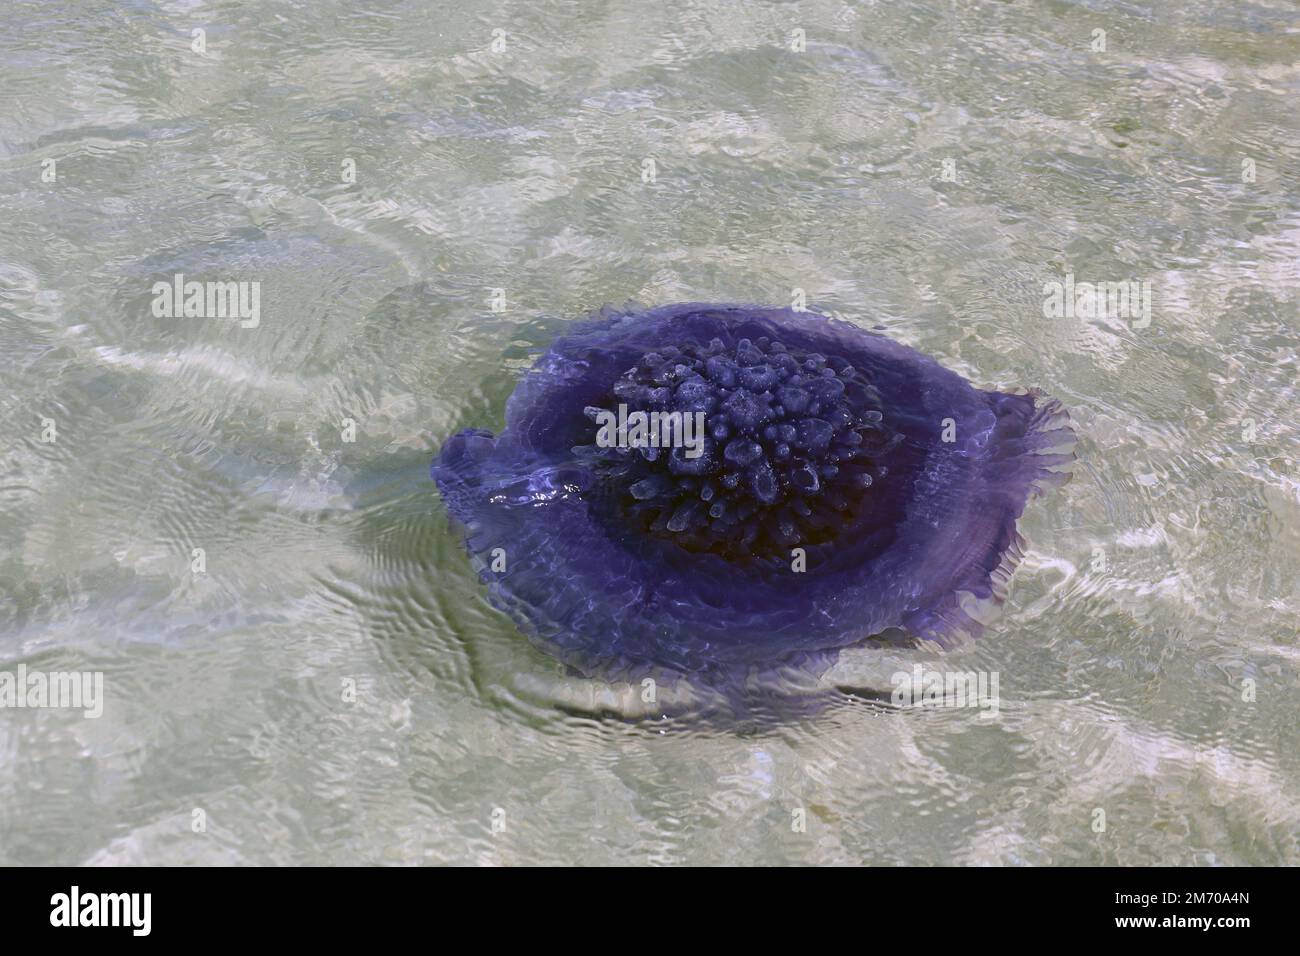 Crown Jellyfish swimming in the Red Sea waters of the Dahlak Archipelago Stock Photo